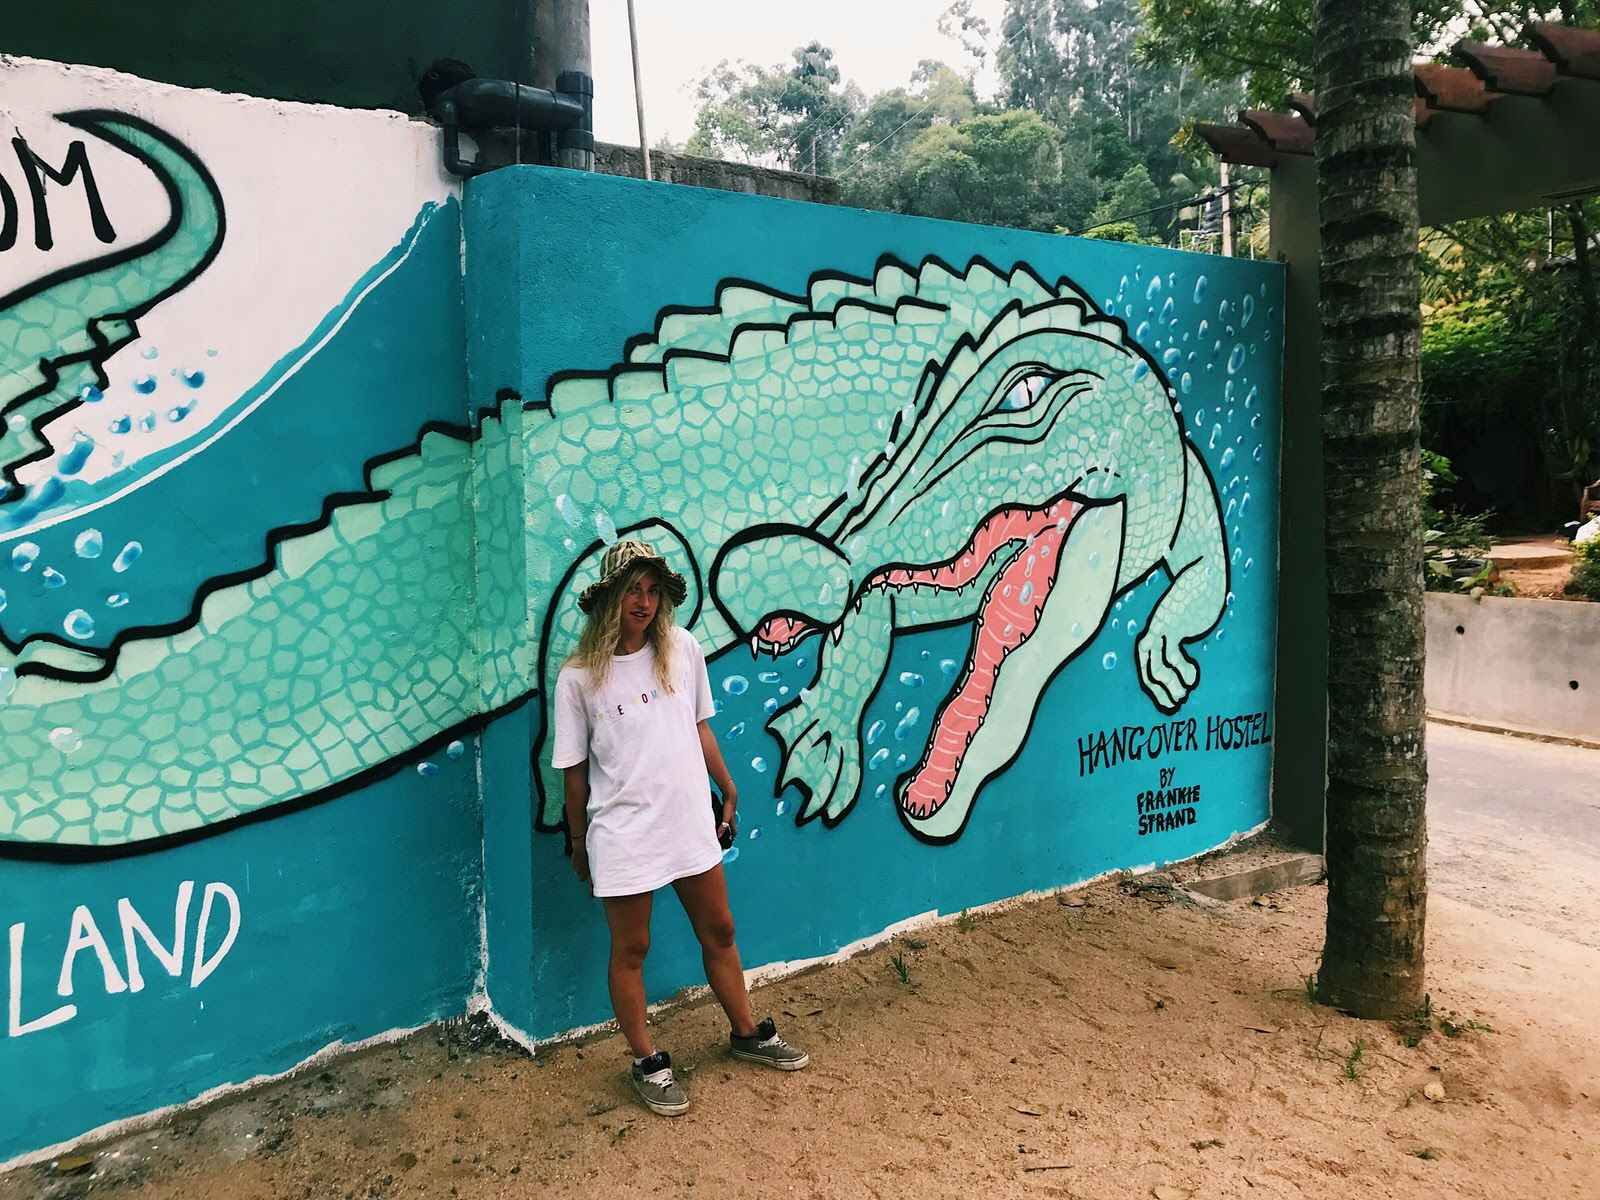 Artist Frankie Strand stands in front of a mural she painted wearing an oversized white t-shirt, trainers and a bucket hat. The mural shows a large alligator turning underwater and has 'HANGOVER HOSTEL' written in the corner.